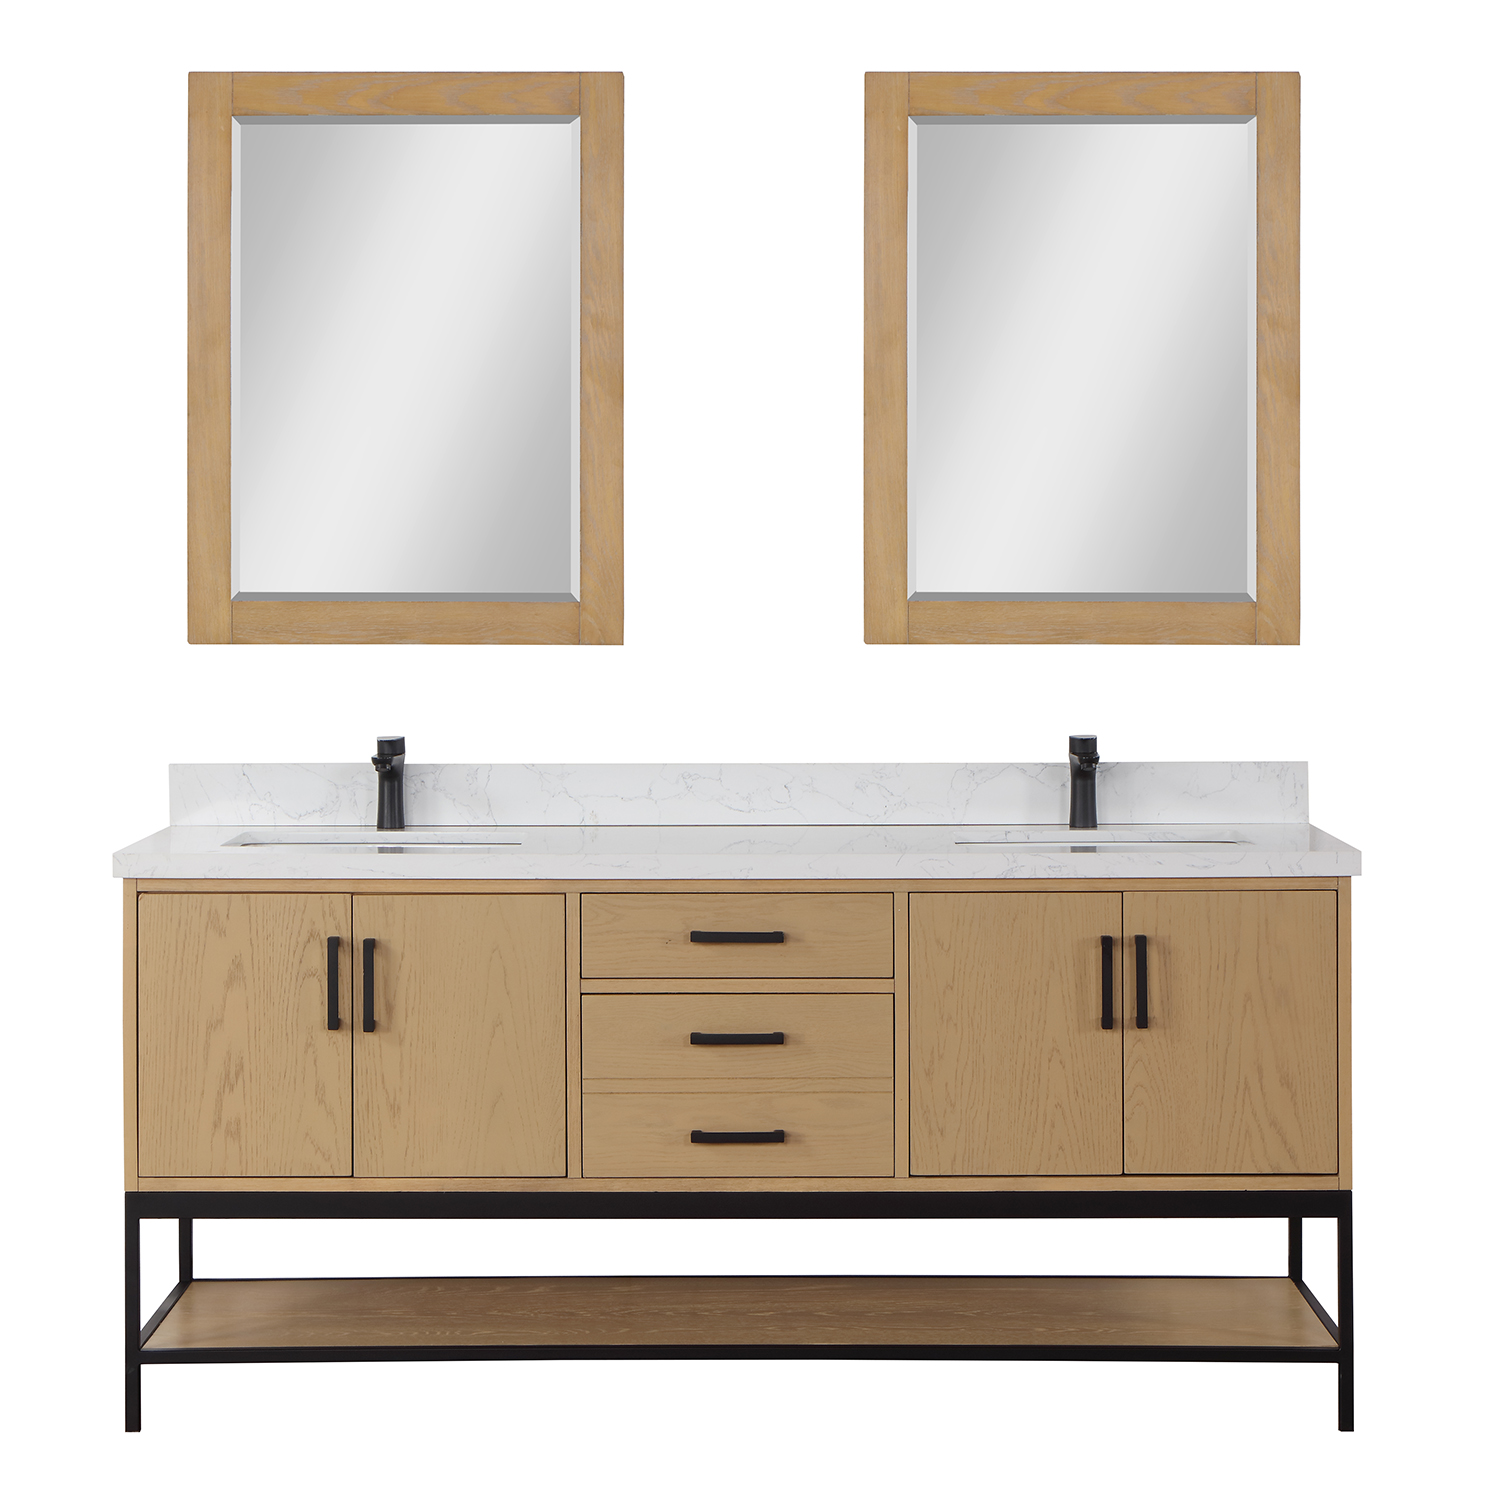 Issac Edwards Collection 72" Double Bathroom Vanity Set in Washed Oak with Grain White Composite Stone Countertop without Mirror 